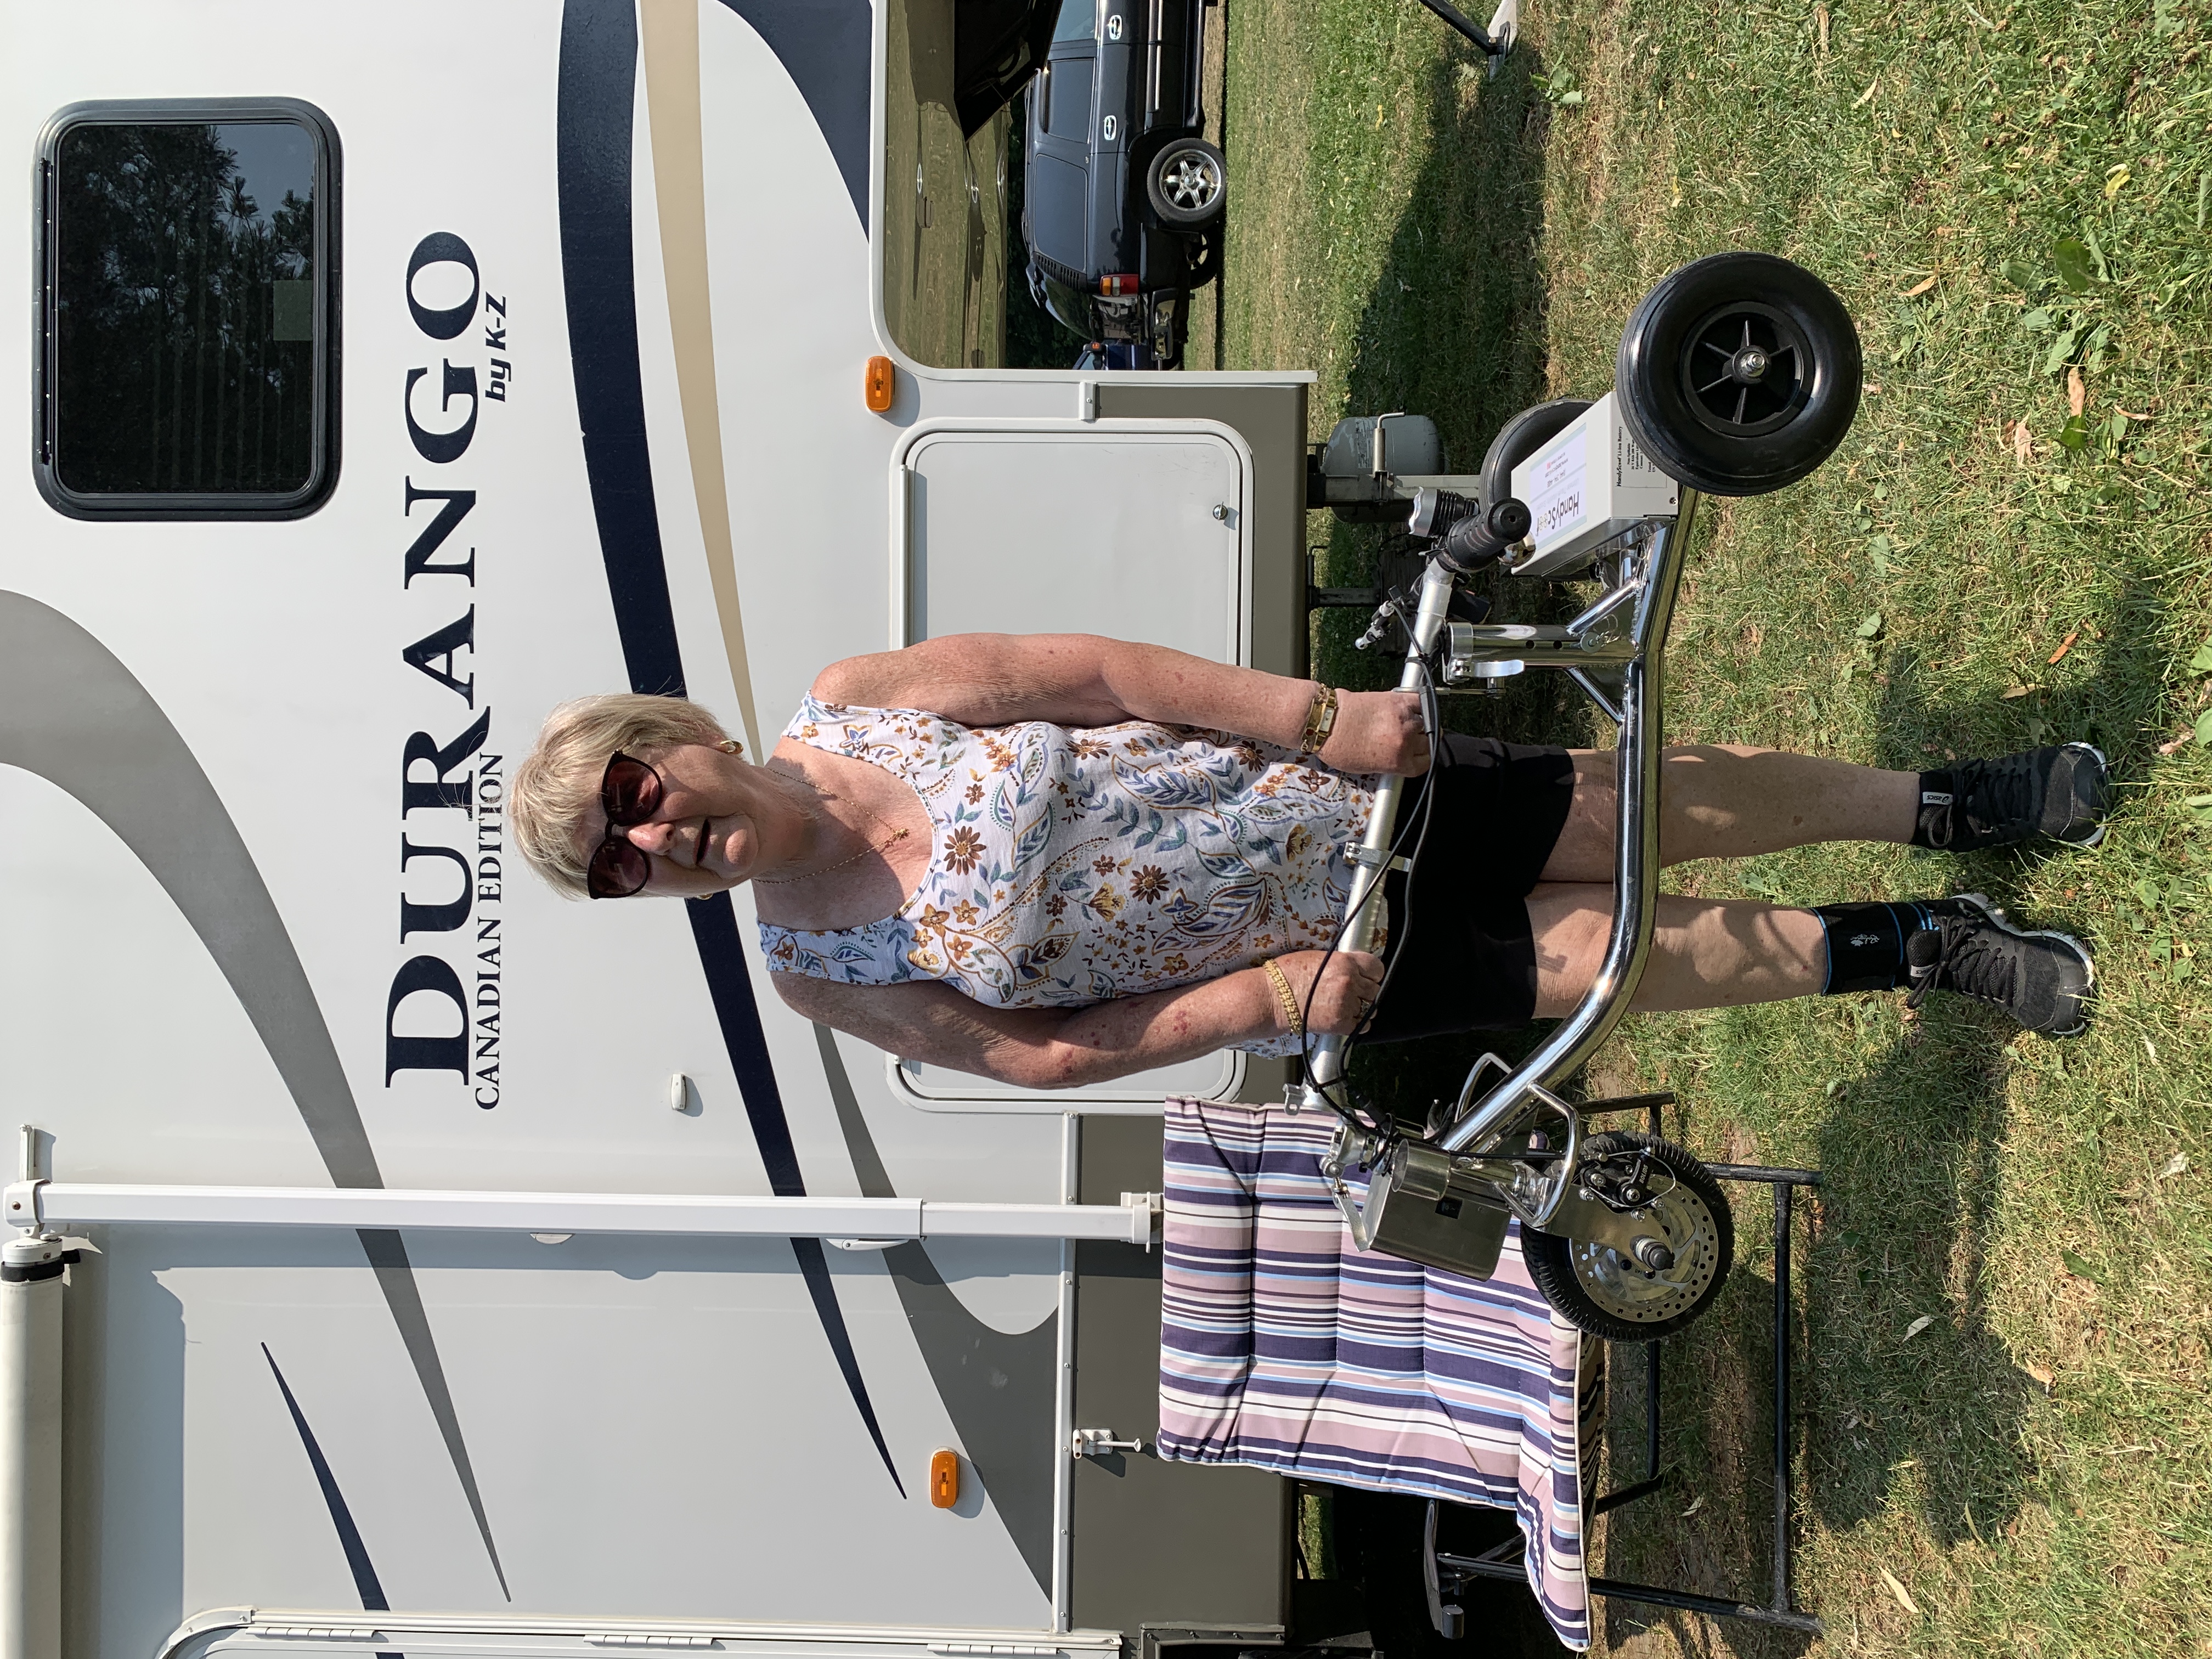 A woman lifting a folded mobility scooter near an RV trailer